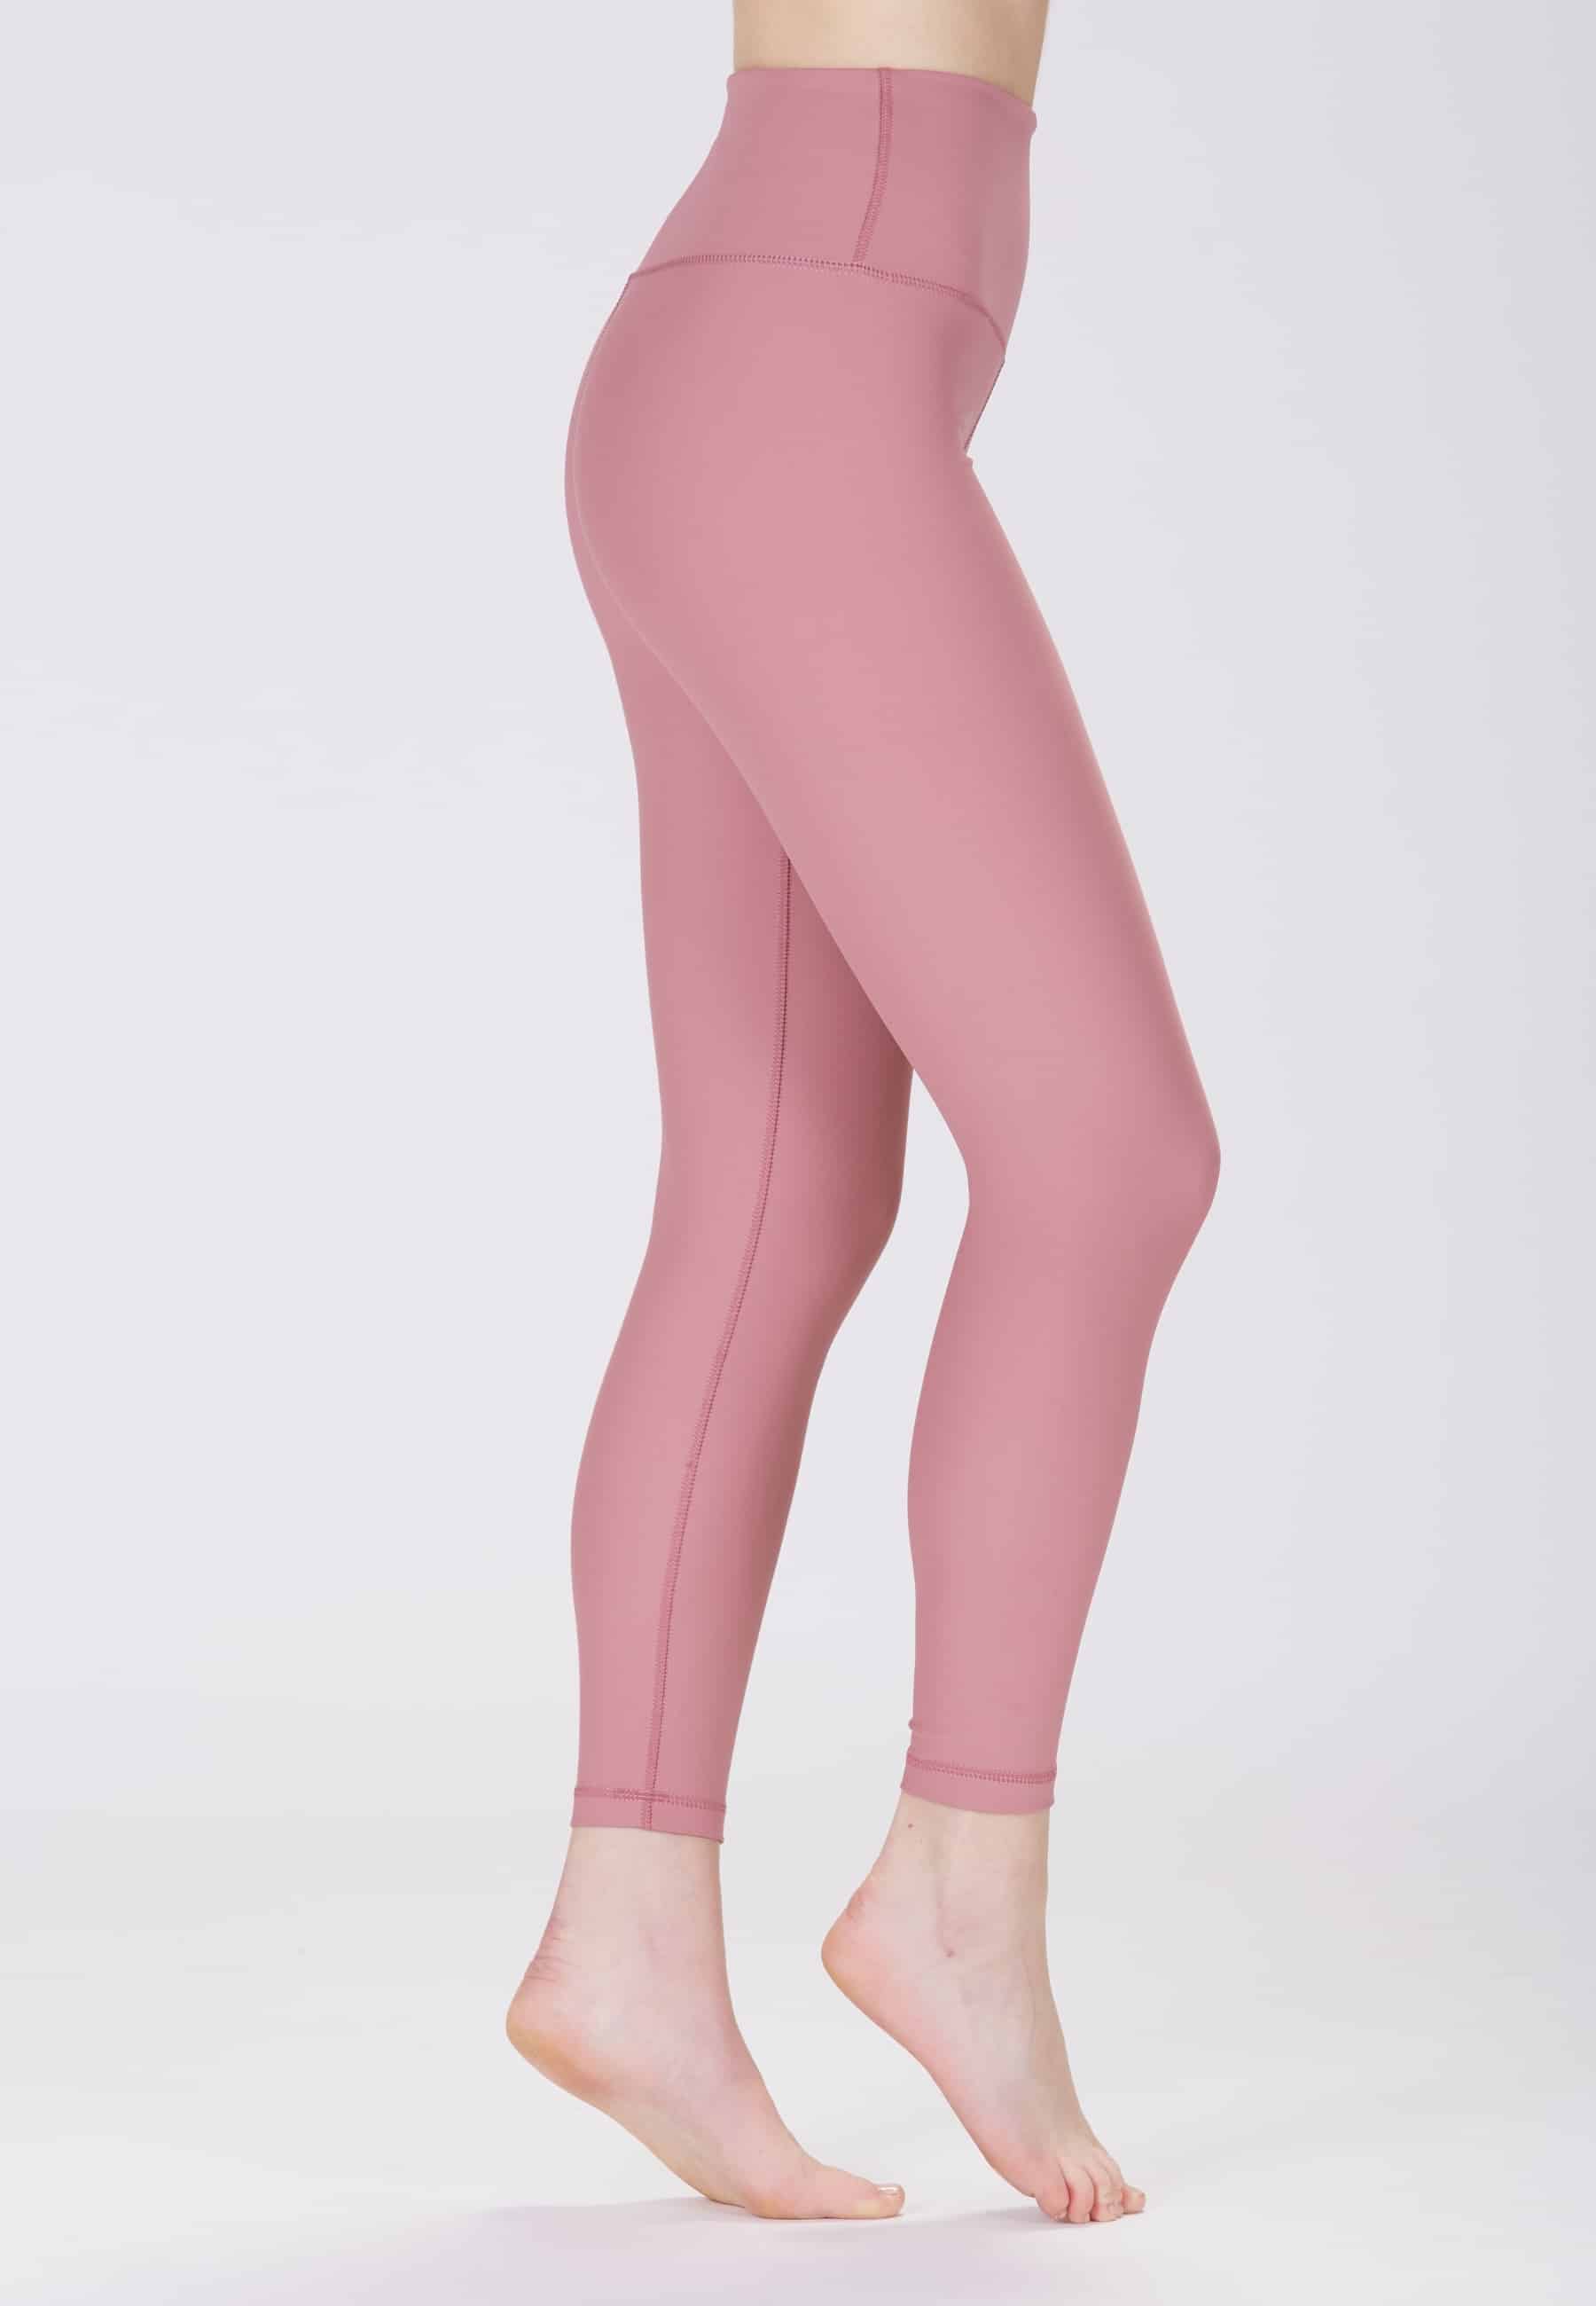 Sisterly Tribe - Classic 7/8 Tights Dusty Pink. Buttery soft & Body sculpting, Soft, matte fabric that feels like a second skin, Compression that follows your every move.